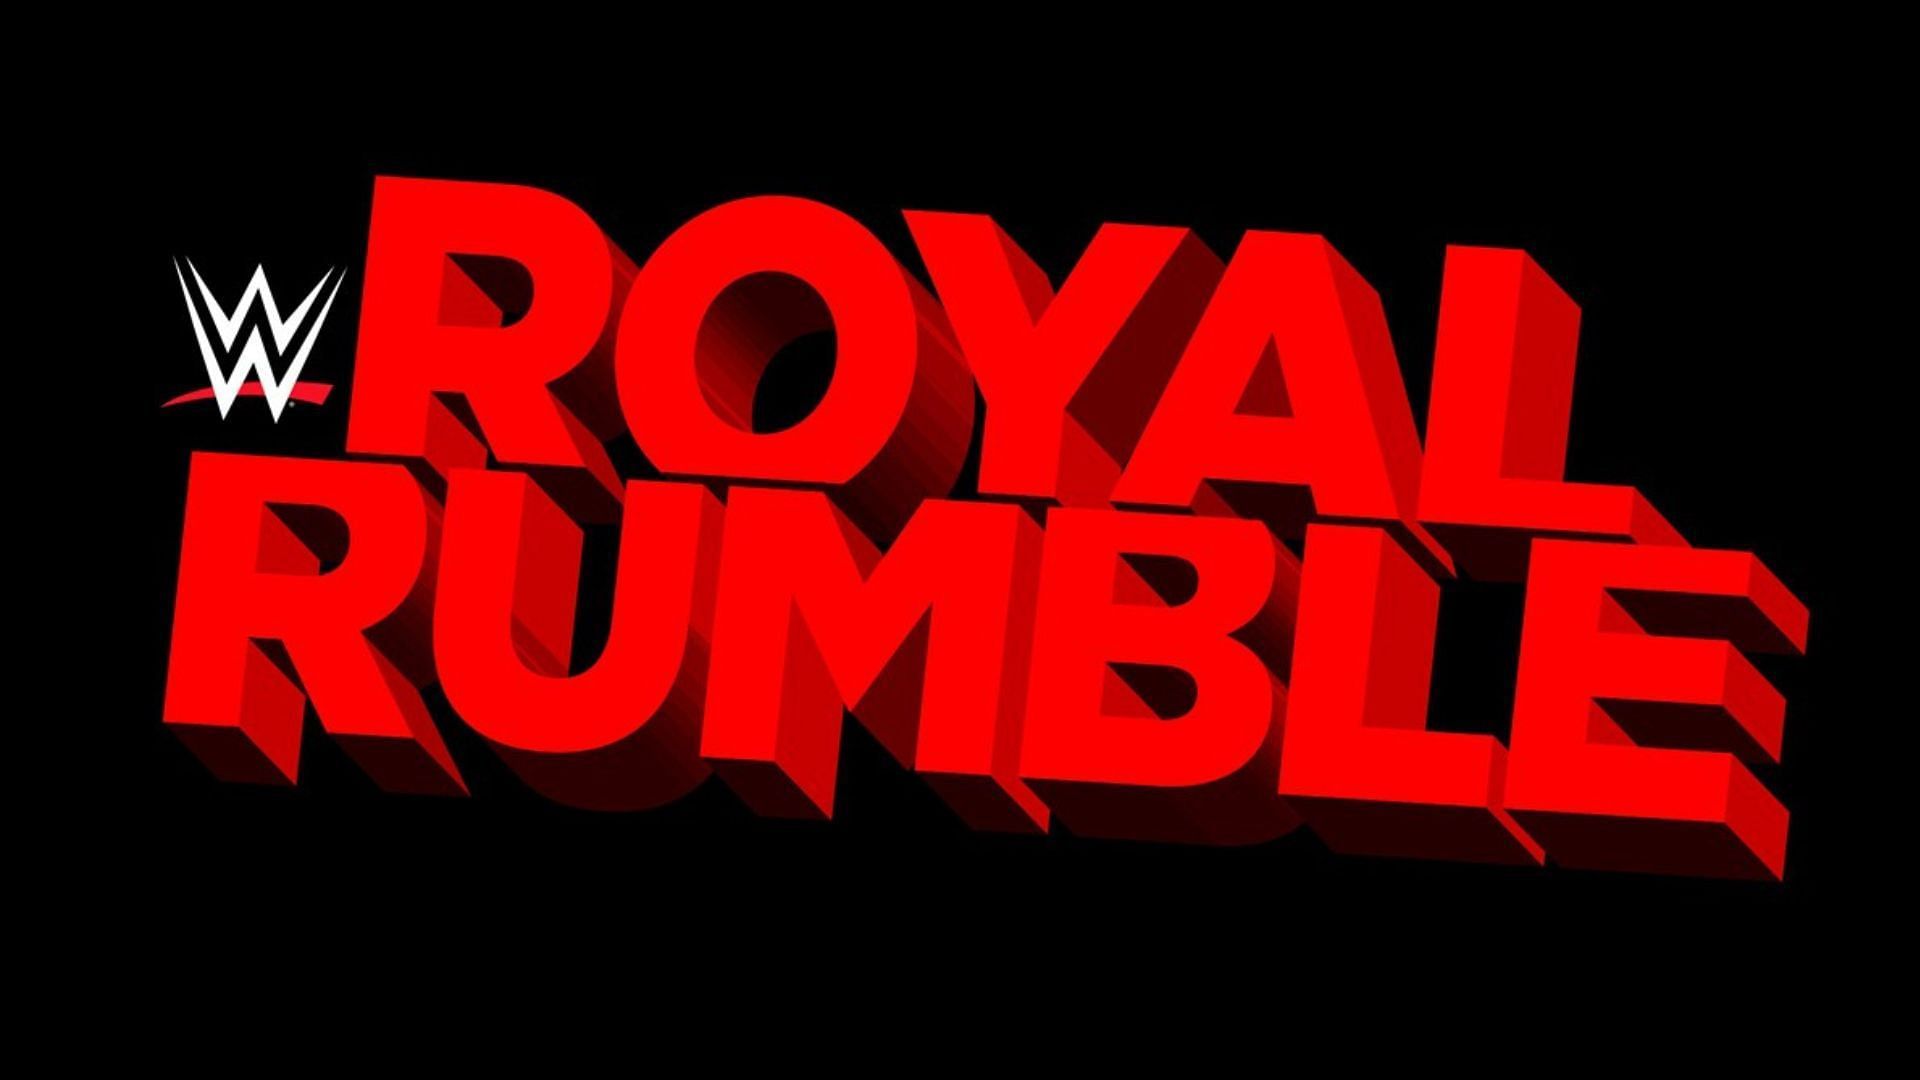 This will be first Royal Rumble PLE under Triple H